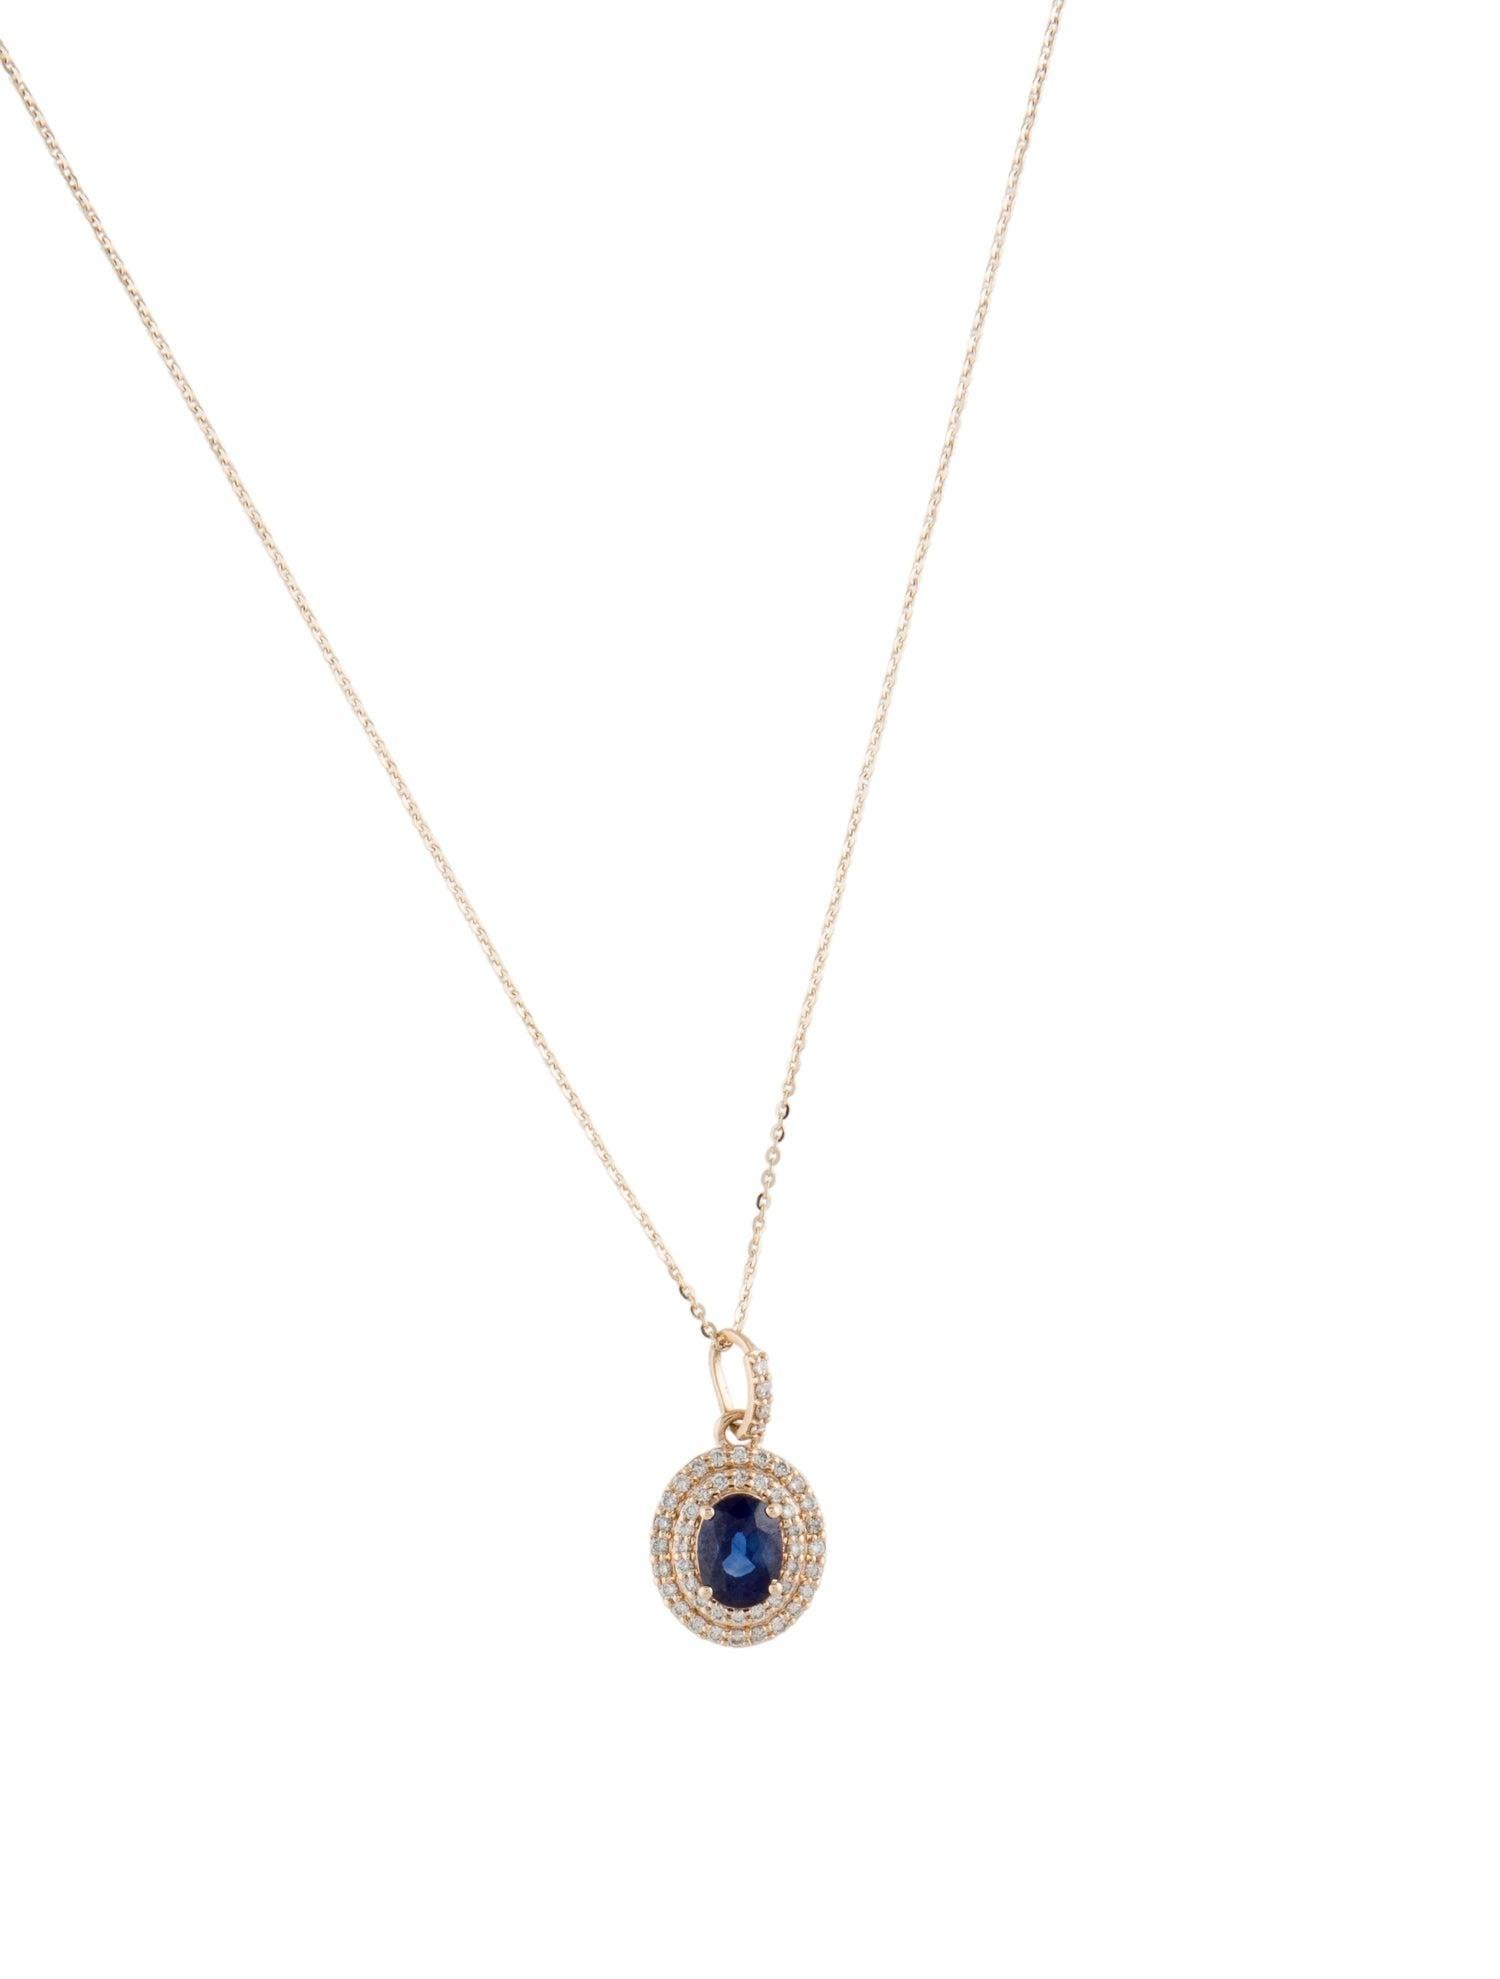 14K 1.43ct Sapphire & Diamond Pendant Necklace: Elegant Luxury Statement Jewelry In New Condition For Sale In Holtsville, NY